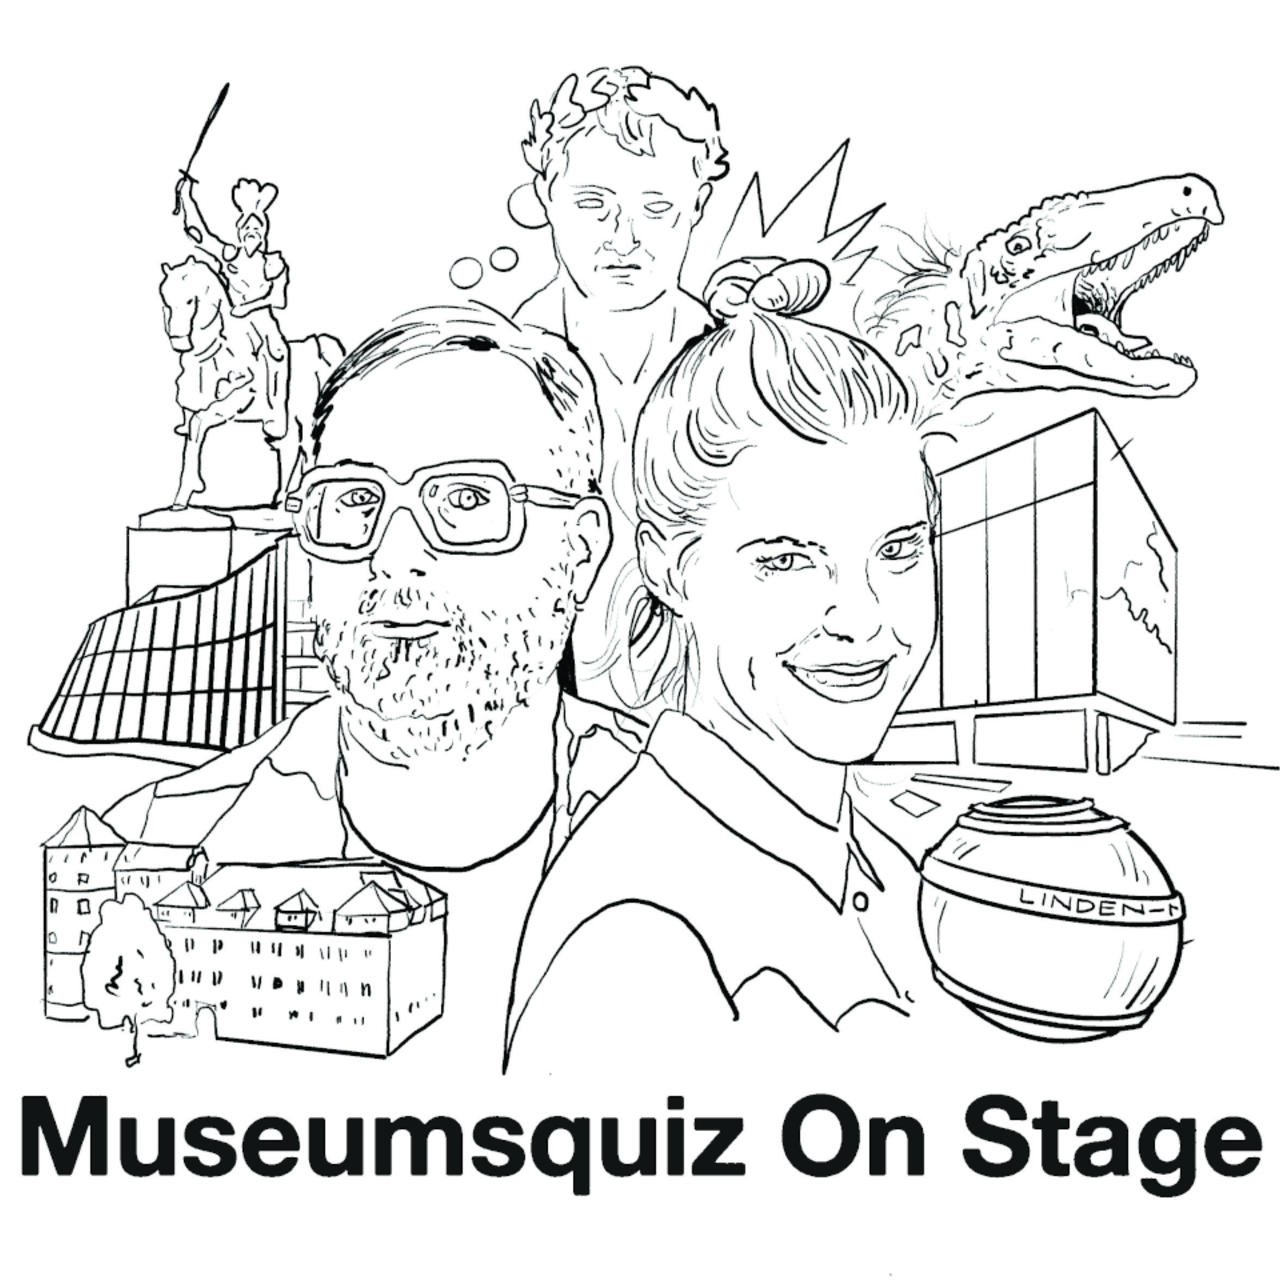 Museumsquiz on Stage